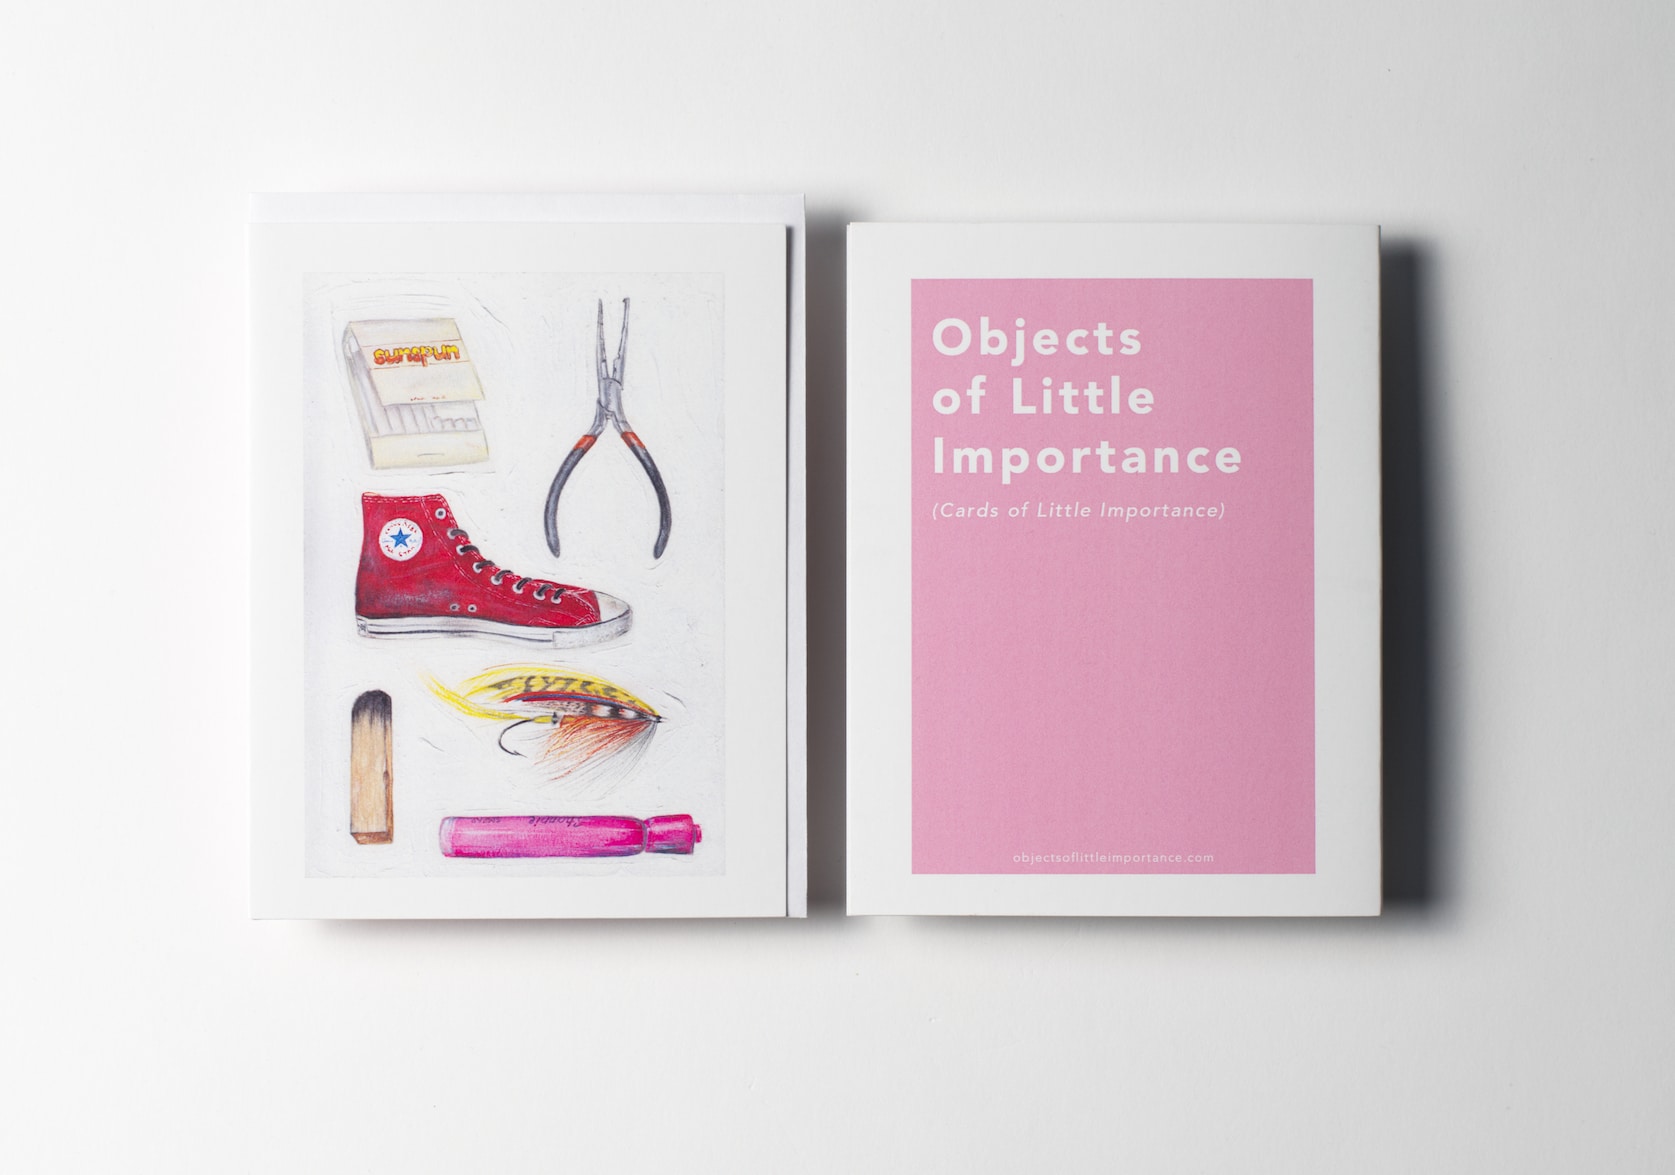 White greeting card featuring paintings of a matchbook, a converse sneaker, pliers, a salmon fly, a palo santo stick, and a pink highlighter. Back of the card is a pink rectangle with white text that reads: Objects of Little Importance (Cards of Little Importance).